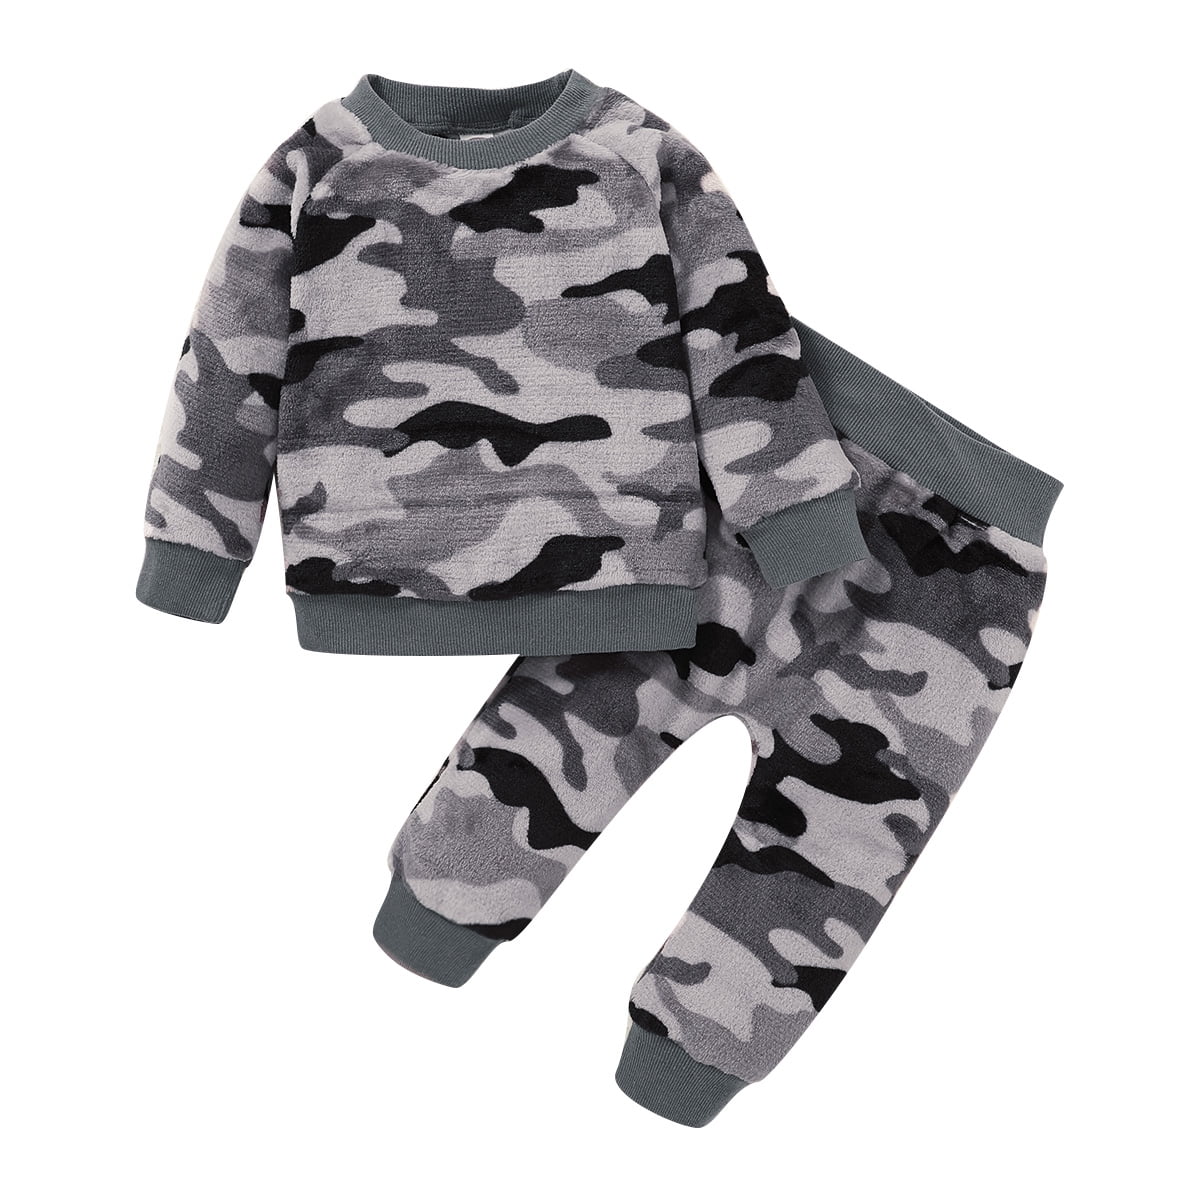 KIMI BEAR Toddler Boys Outfits 3T Toddler Boy Autumn Winter Outfits 3T ...